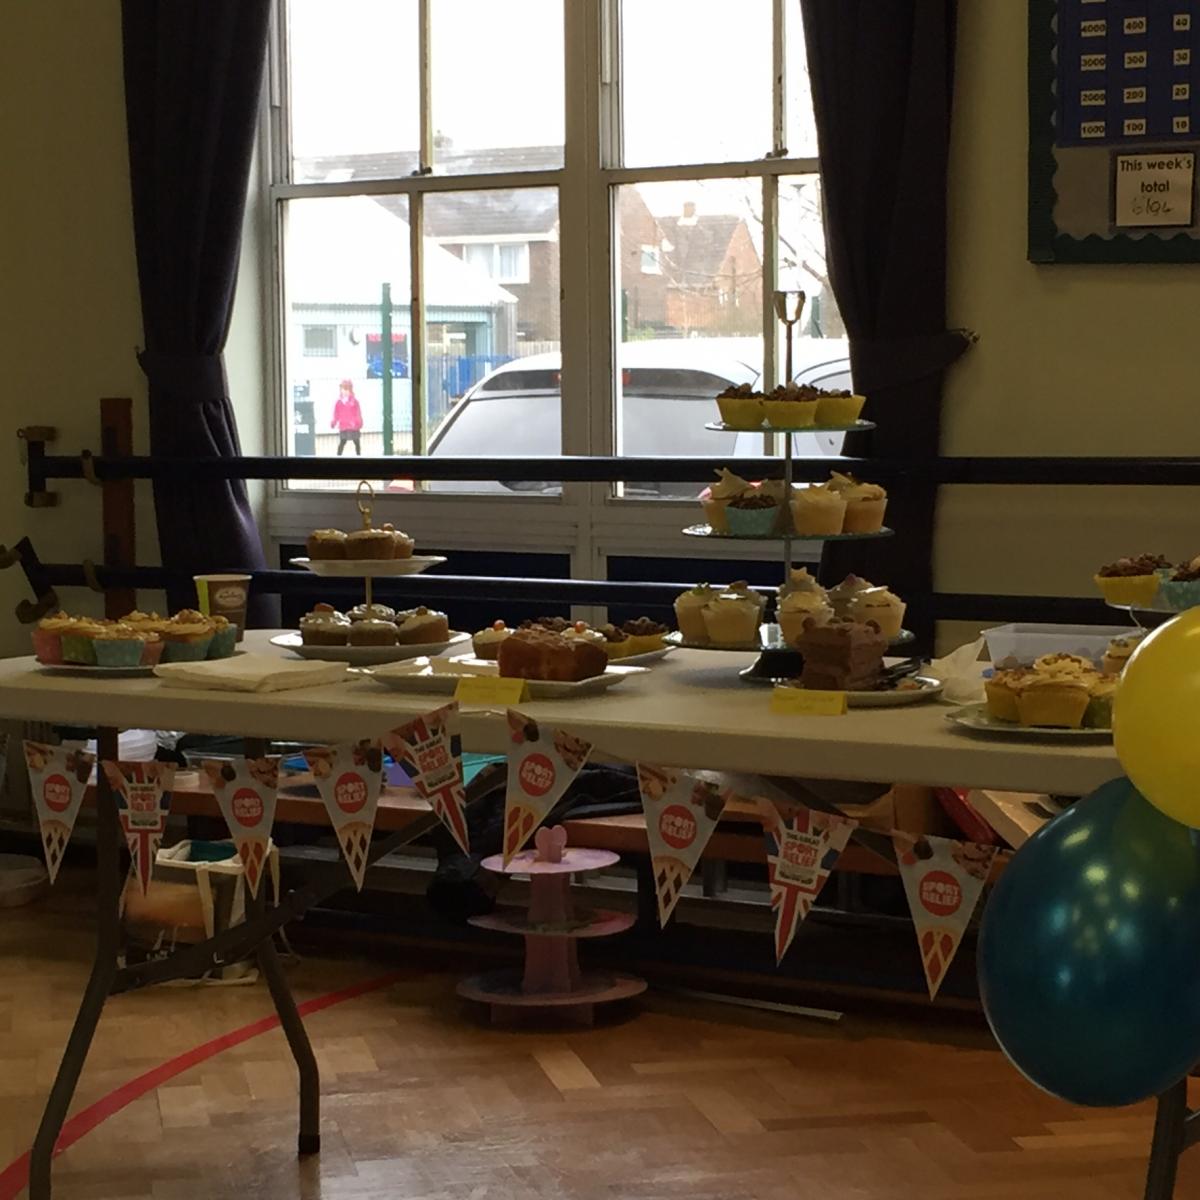 More than £100 was raised for Sport Relief by St Oswald's CE Primary School, through a coffee morning and bake sale